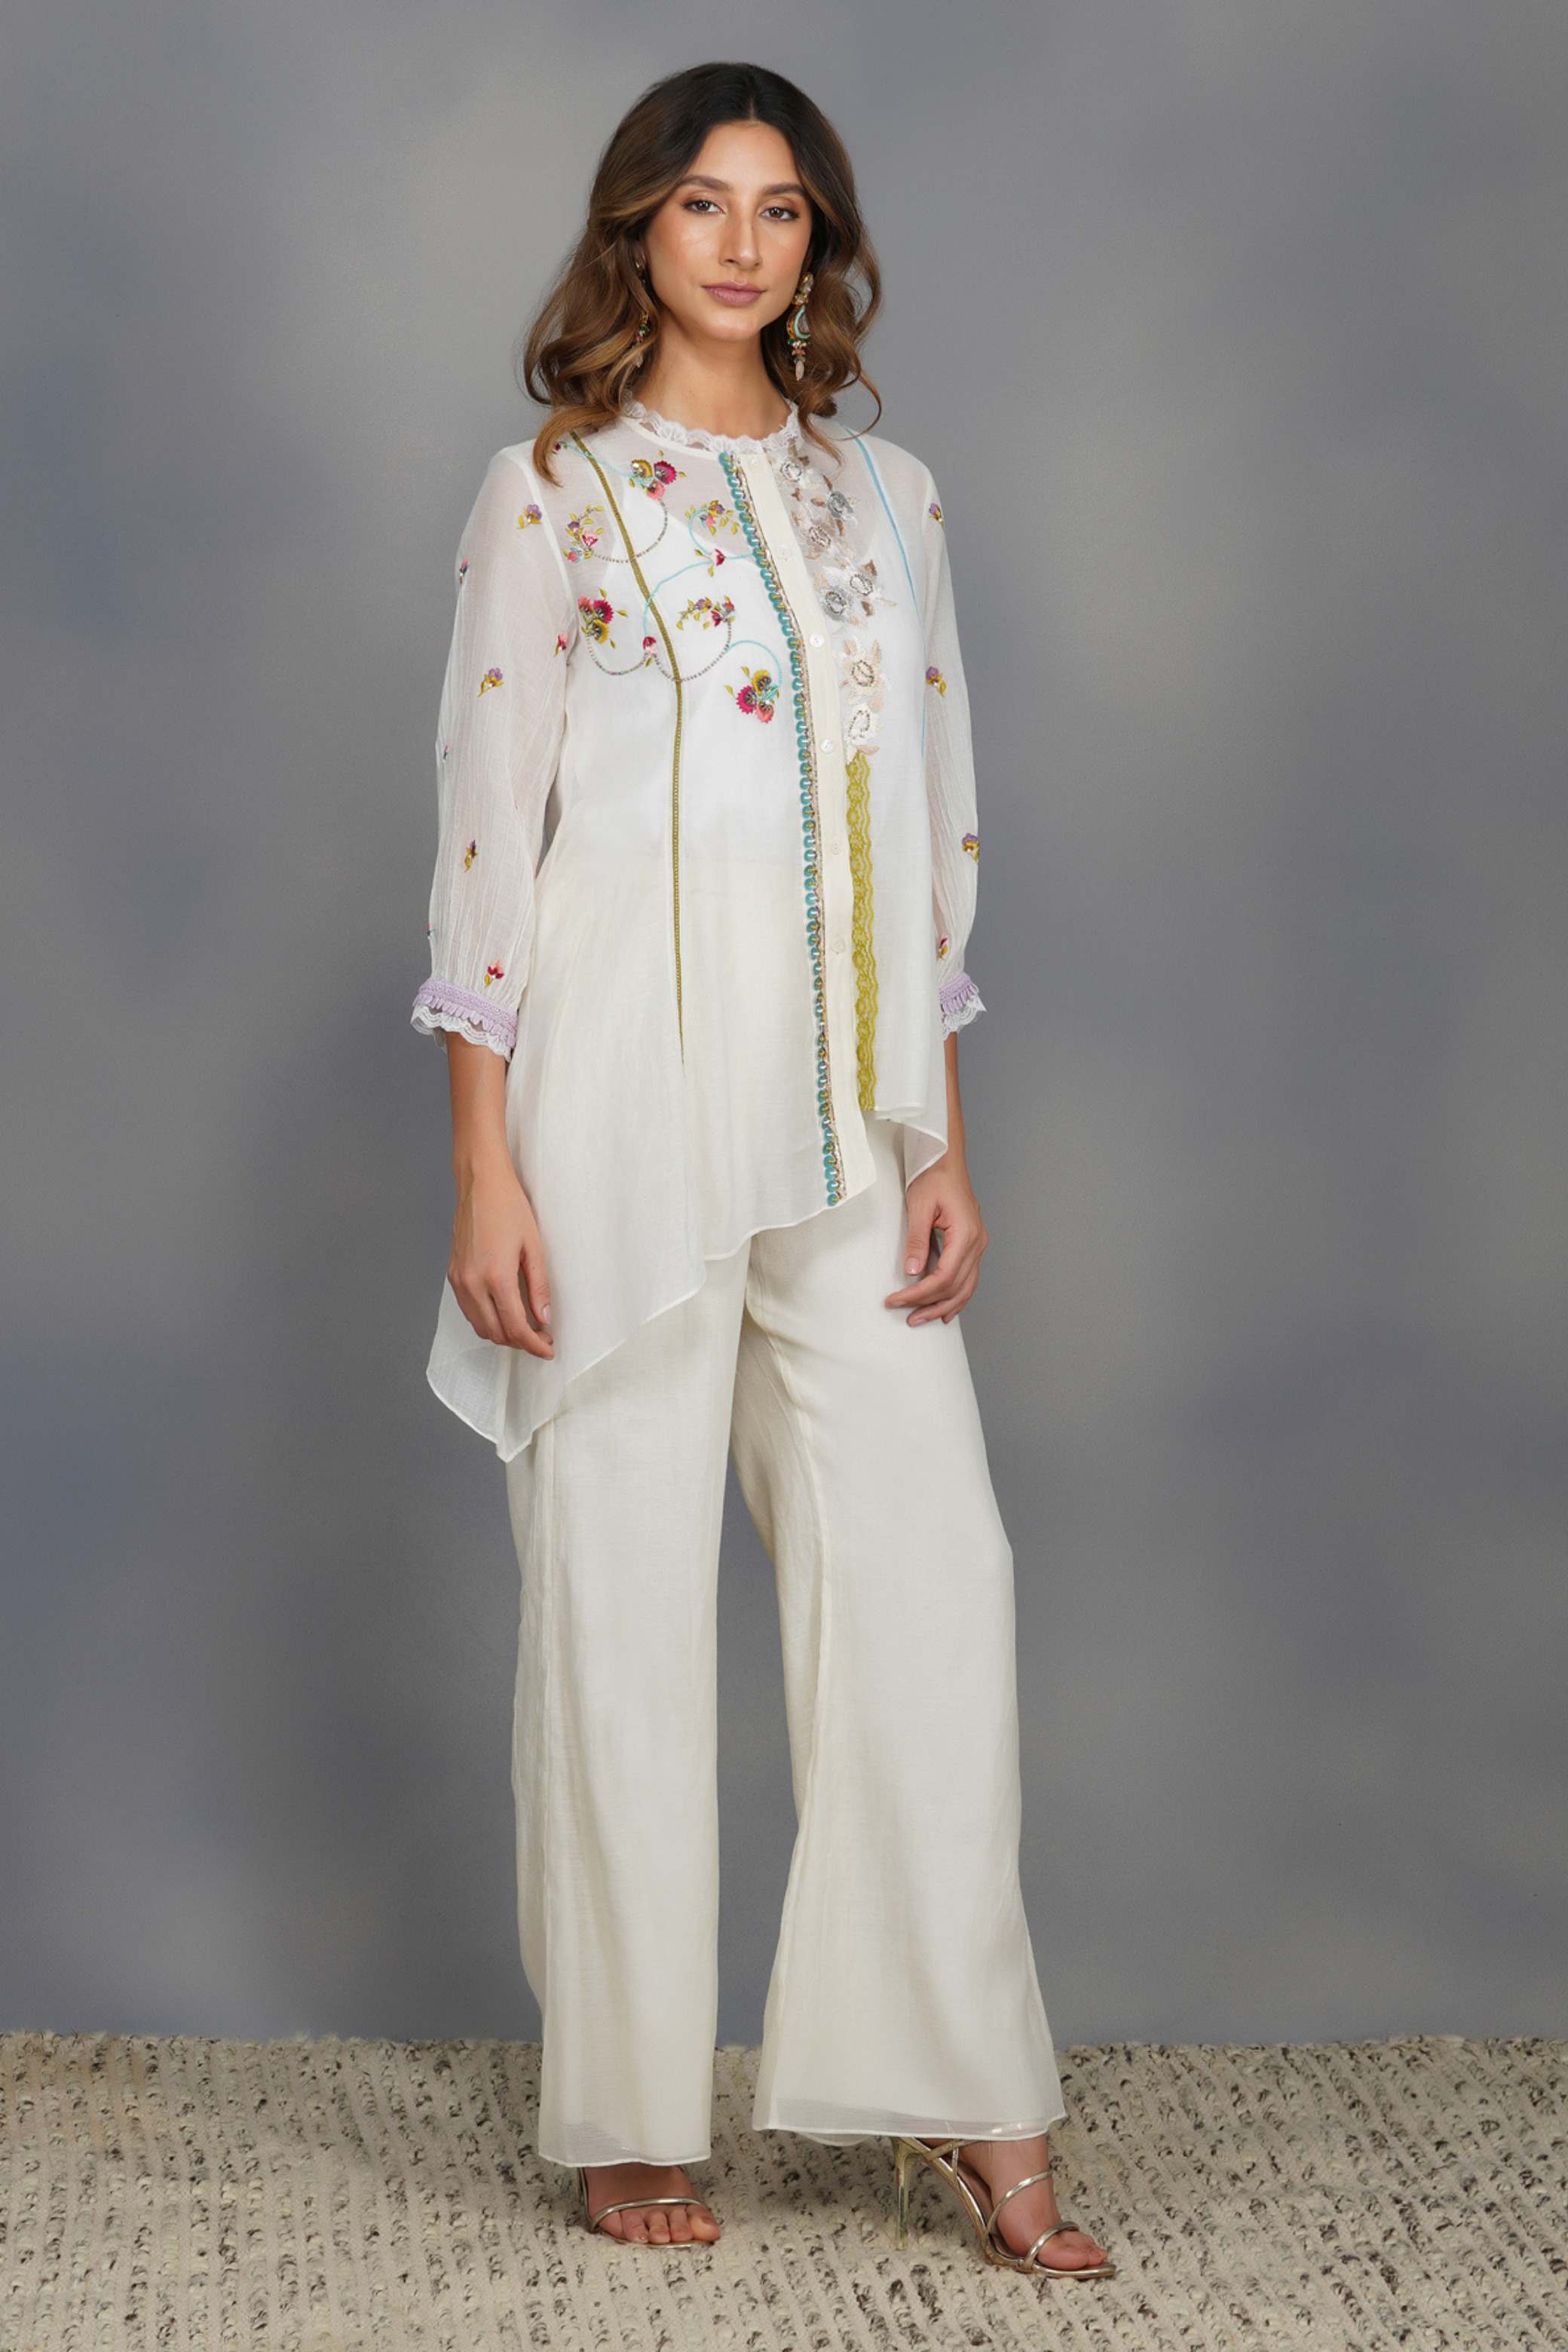 embellished in eclectic motifs and is paired with elasticated flared pants